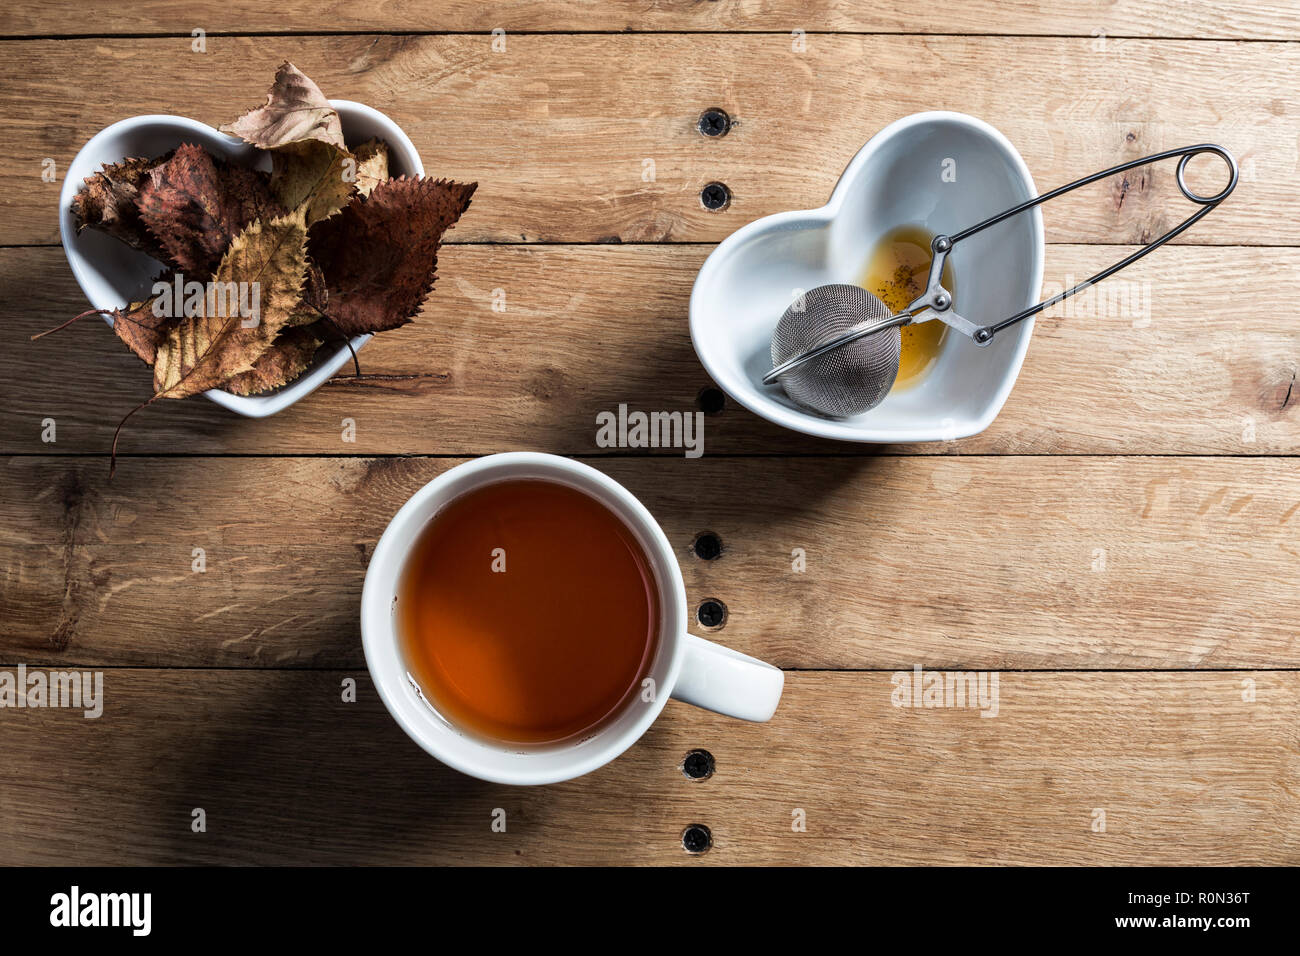 A mug of herbal tea with a steel mesh strainer and autumn leaves table decoration. Stock Photo